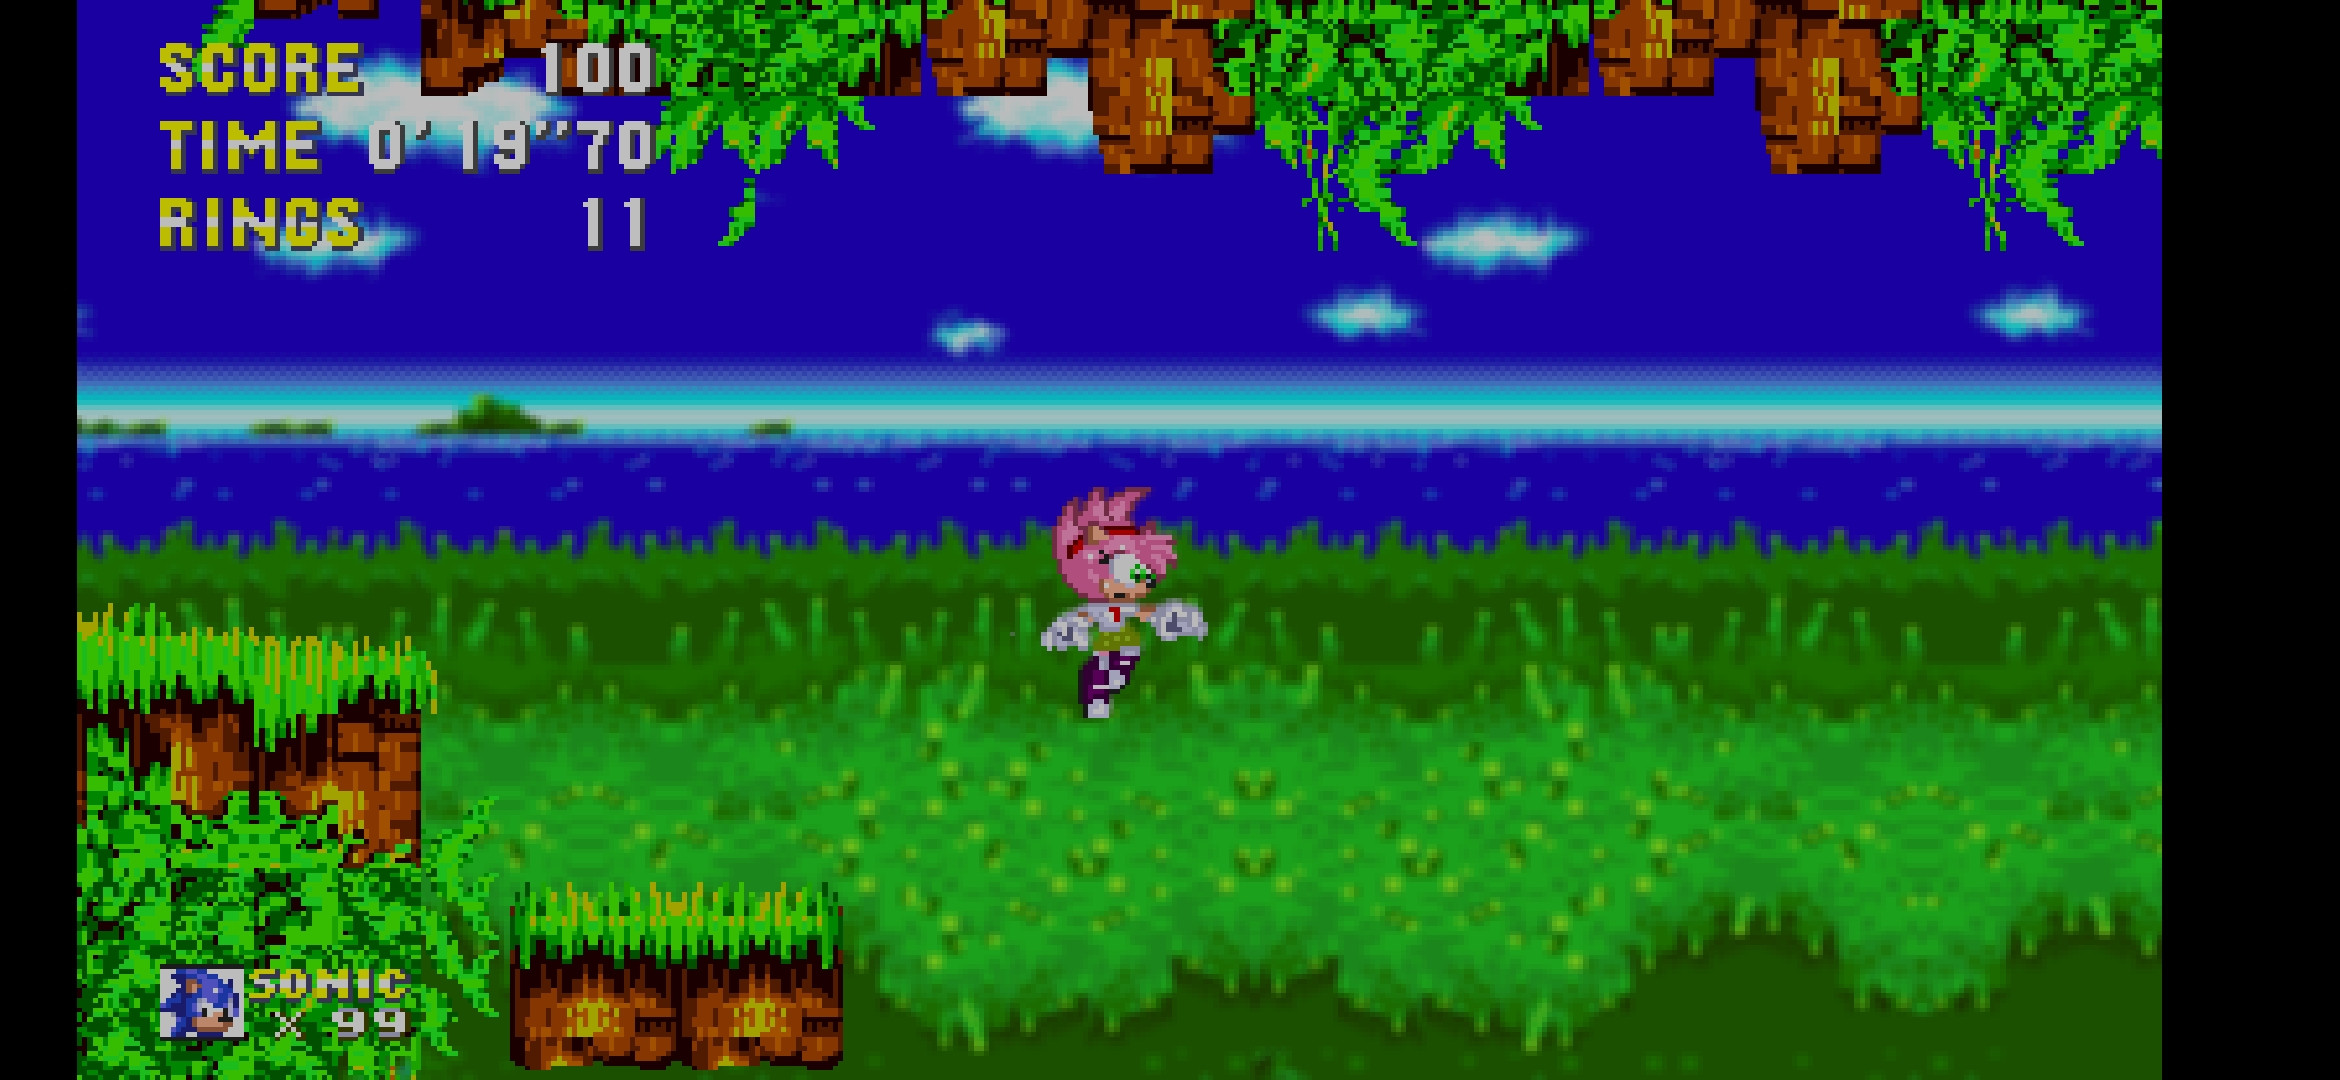 Fleetway Amy in Sonic 3 air [Sonic 3 A.I.R.] [Mods]